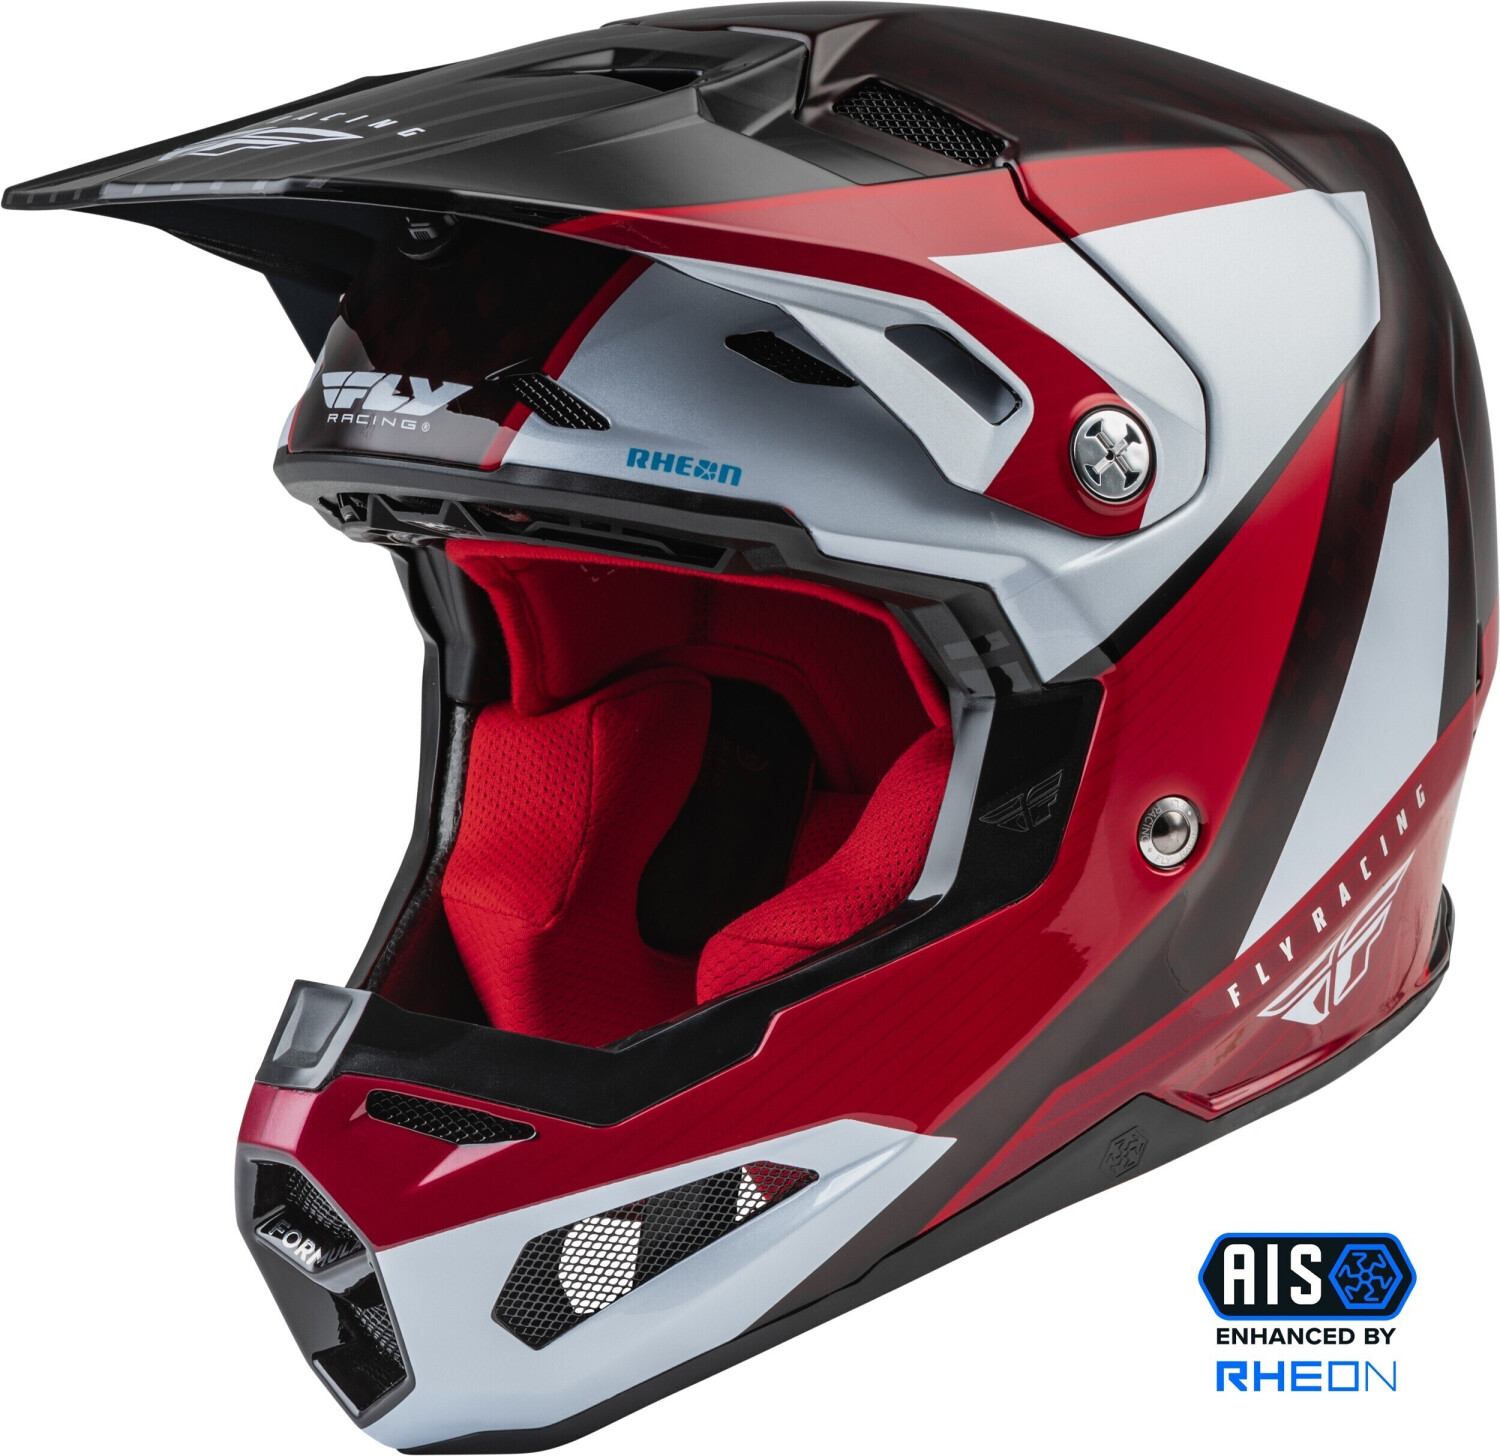 Photos - Motorcycle Helmet FLY Racing Formula Carbon Prime red/white/red carbon 